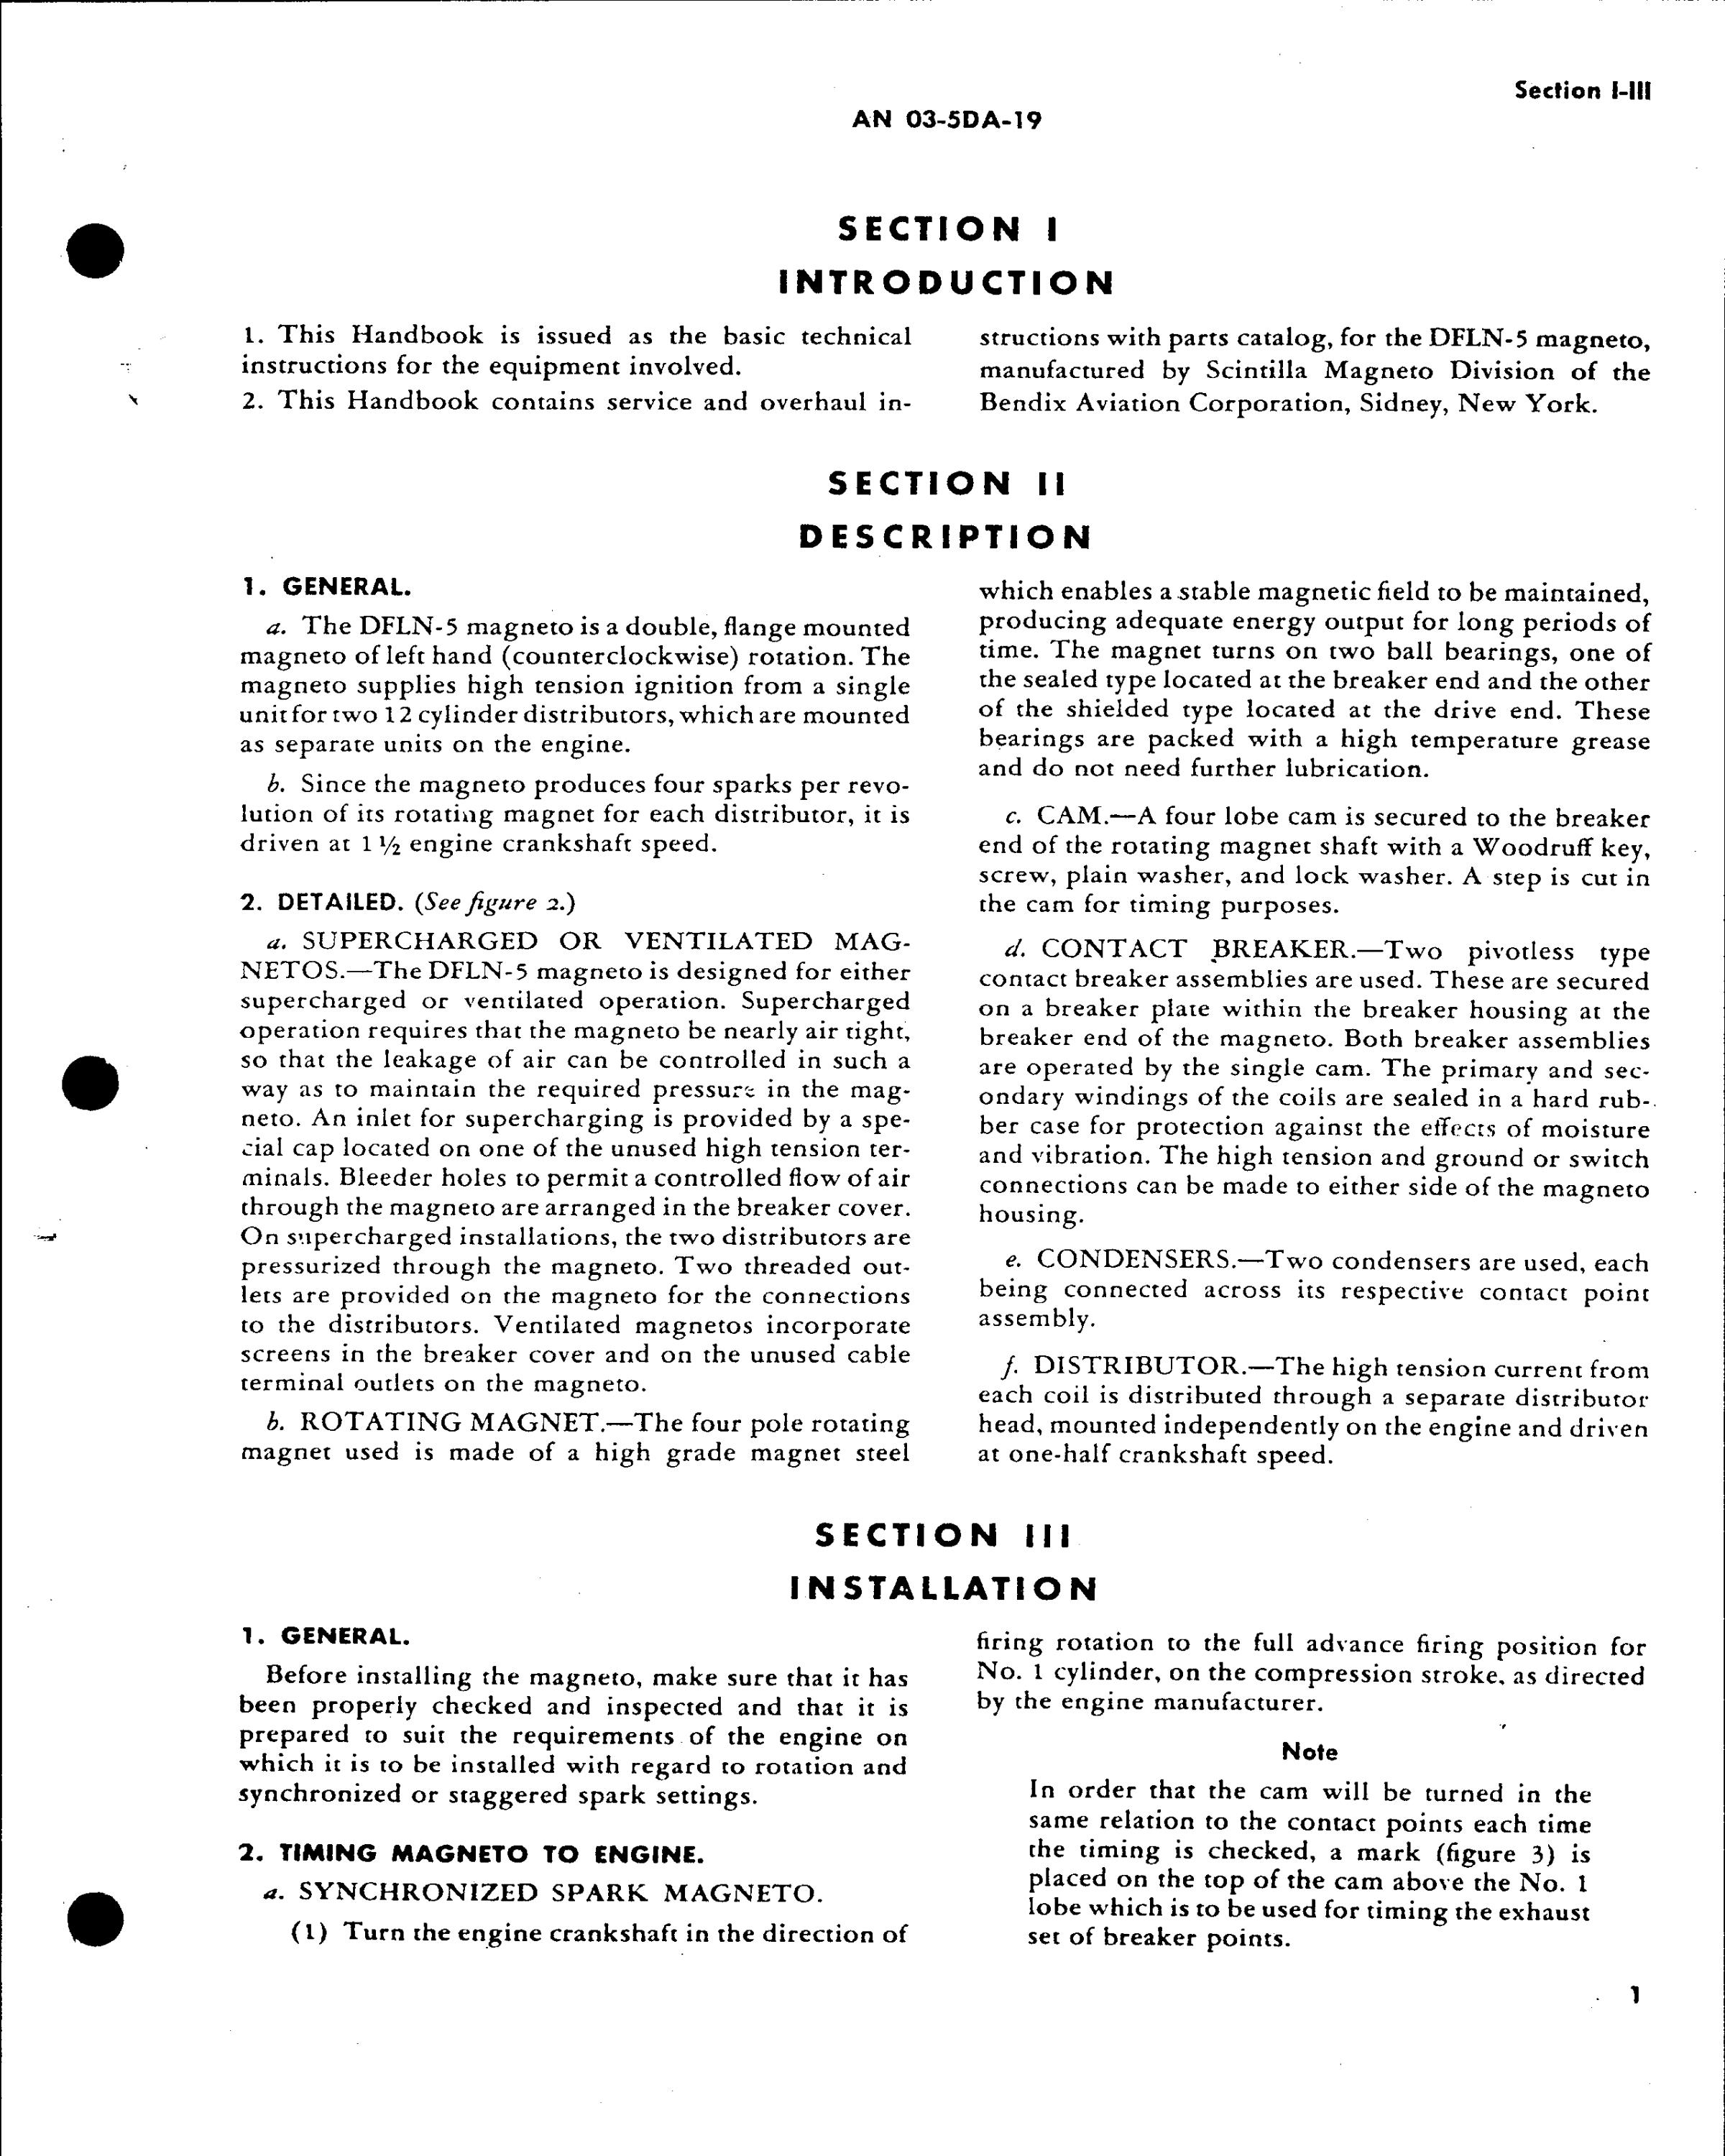 Sample page 5 from AirCorps Library document: Operation, Service, & Overhaul with Parts Catalog for Magneto Type DFLN-5